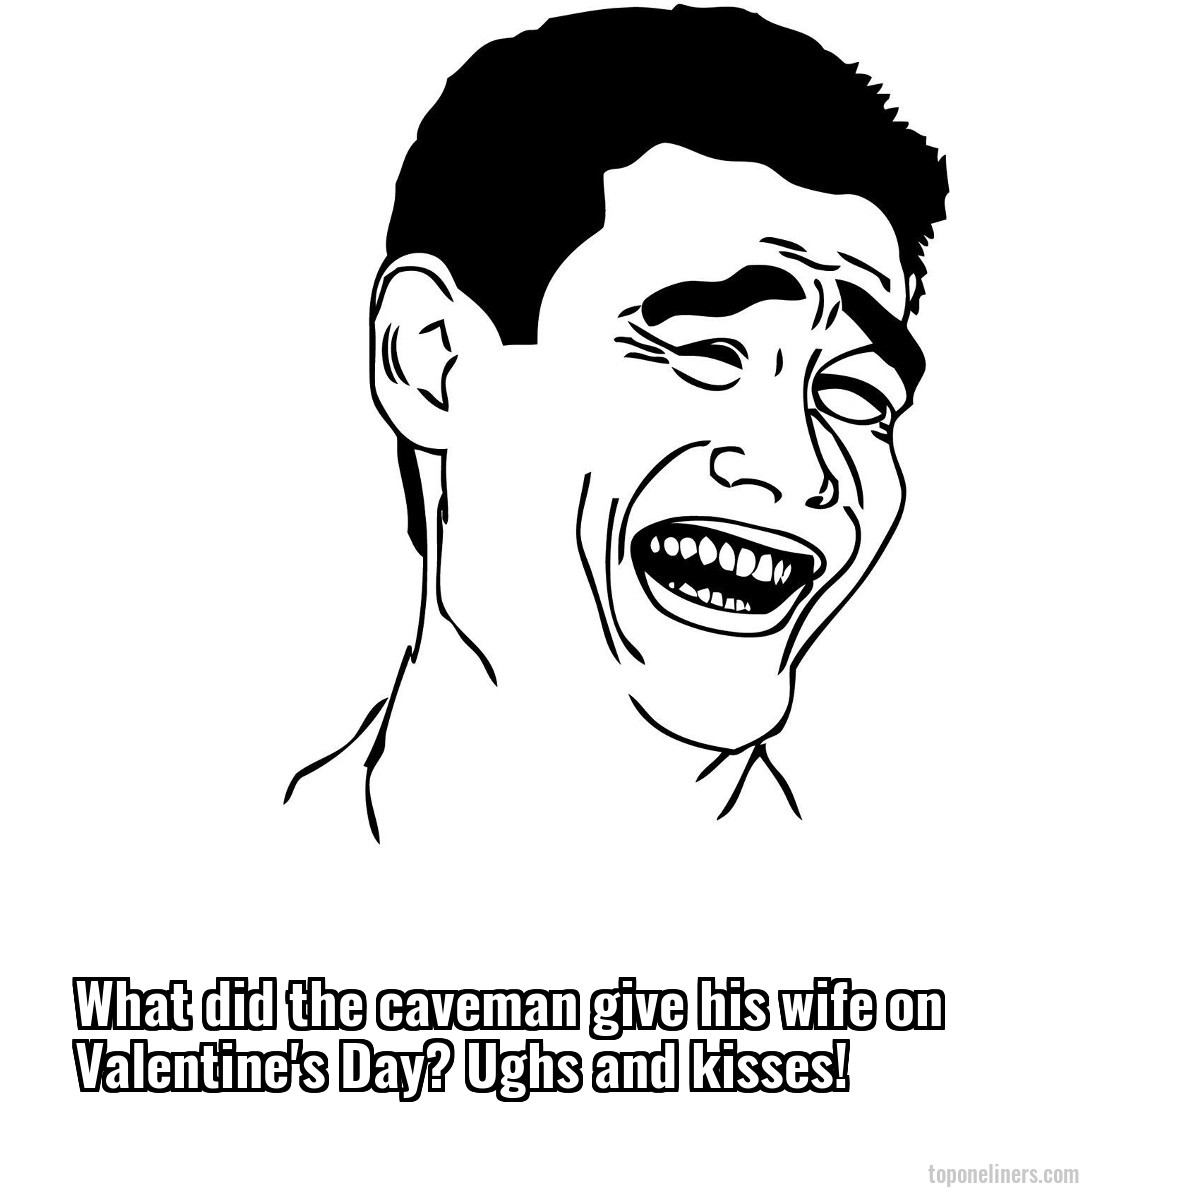 What did the caveman give his wife on Valentine's Day? Ughs and kisses!
